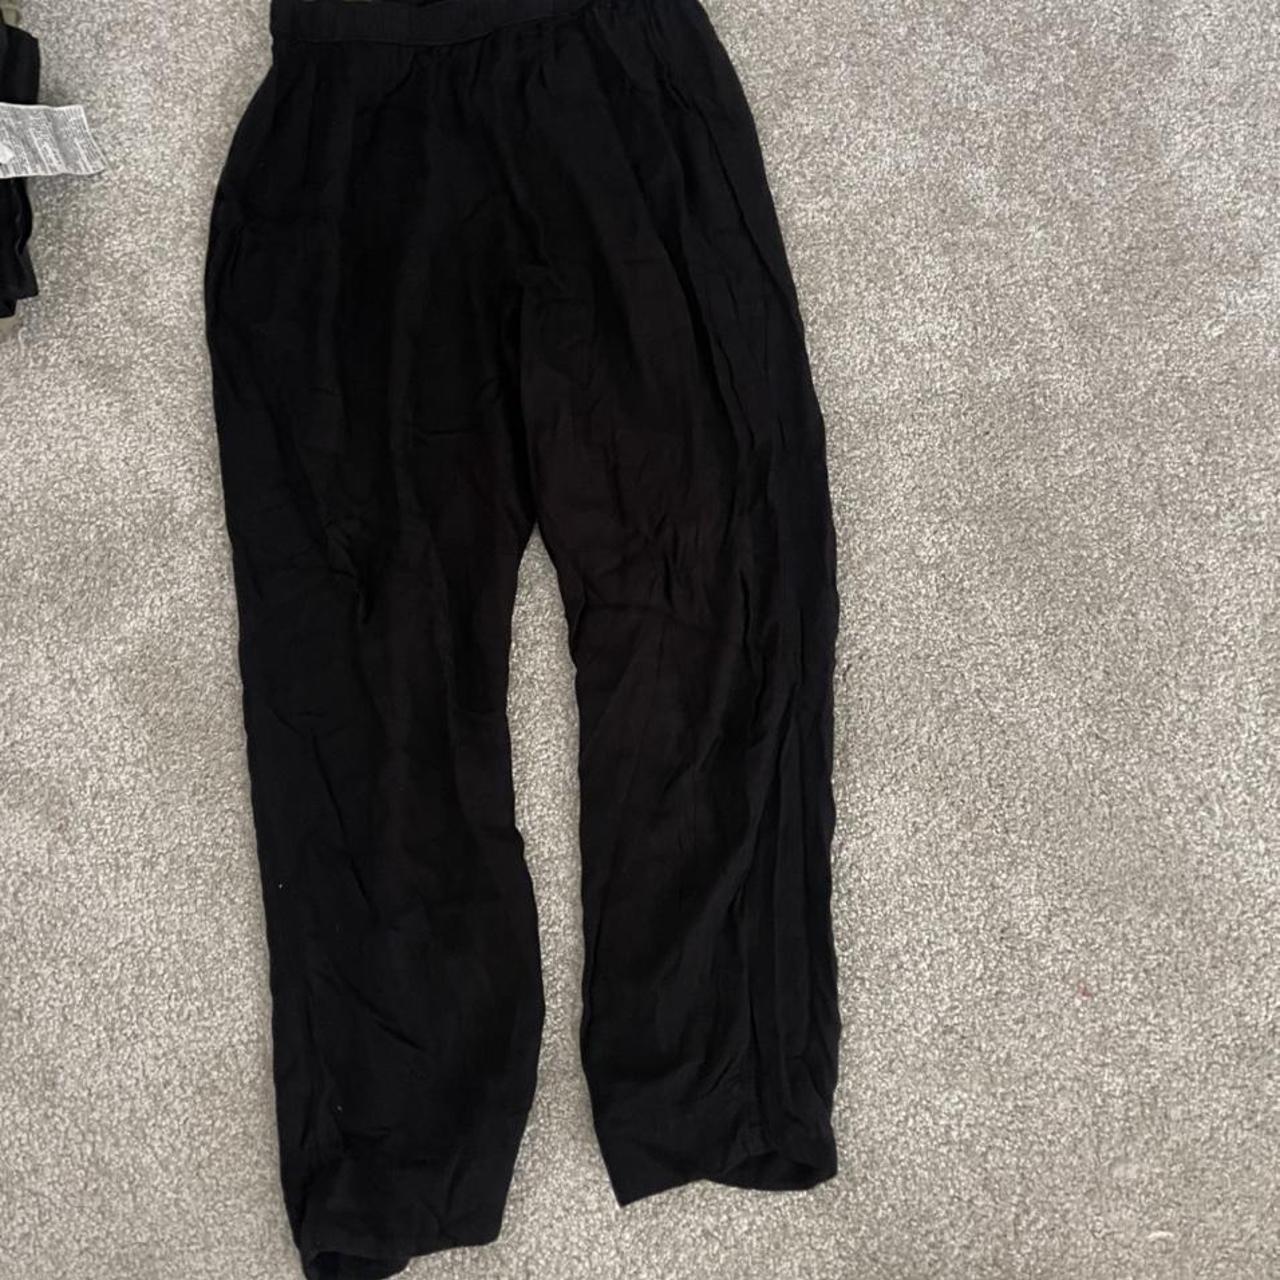 Black comfy trousers Need an iron Size L Would... - Depop